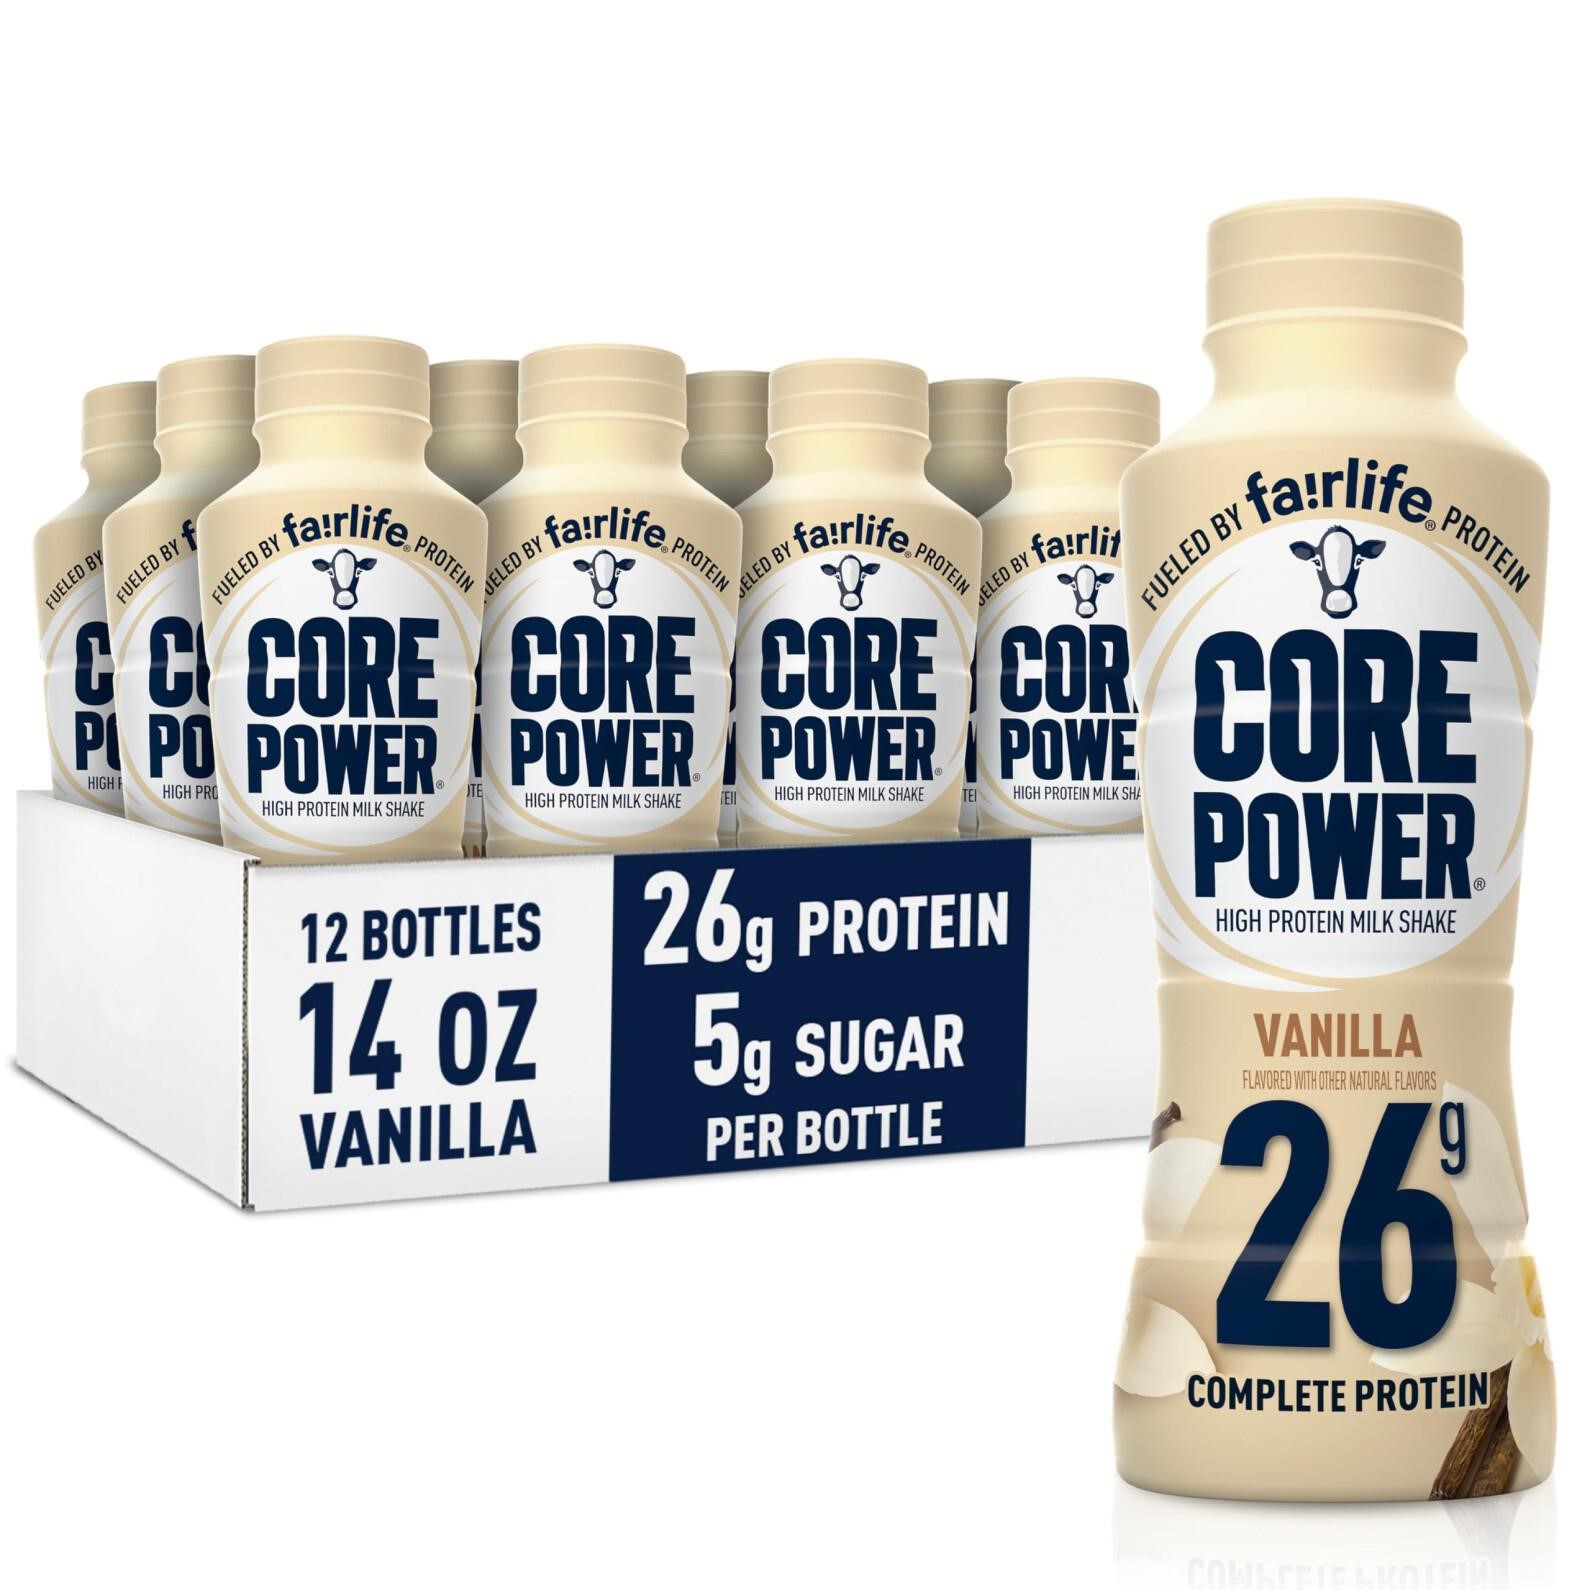 Core Power Fairlife 26g Protein Milk Shakes, Ready